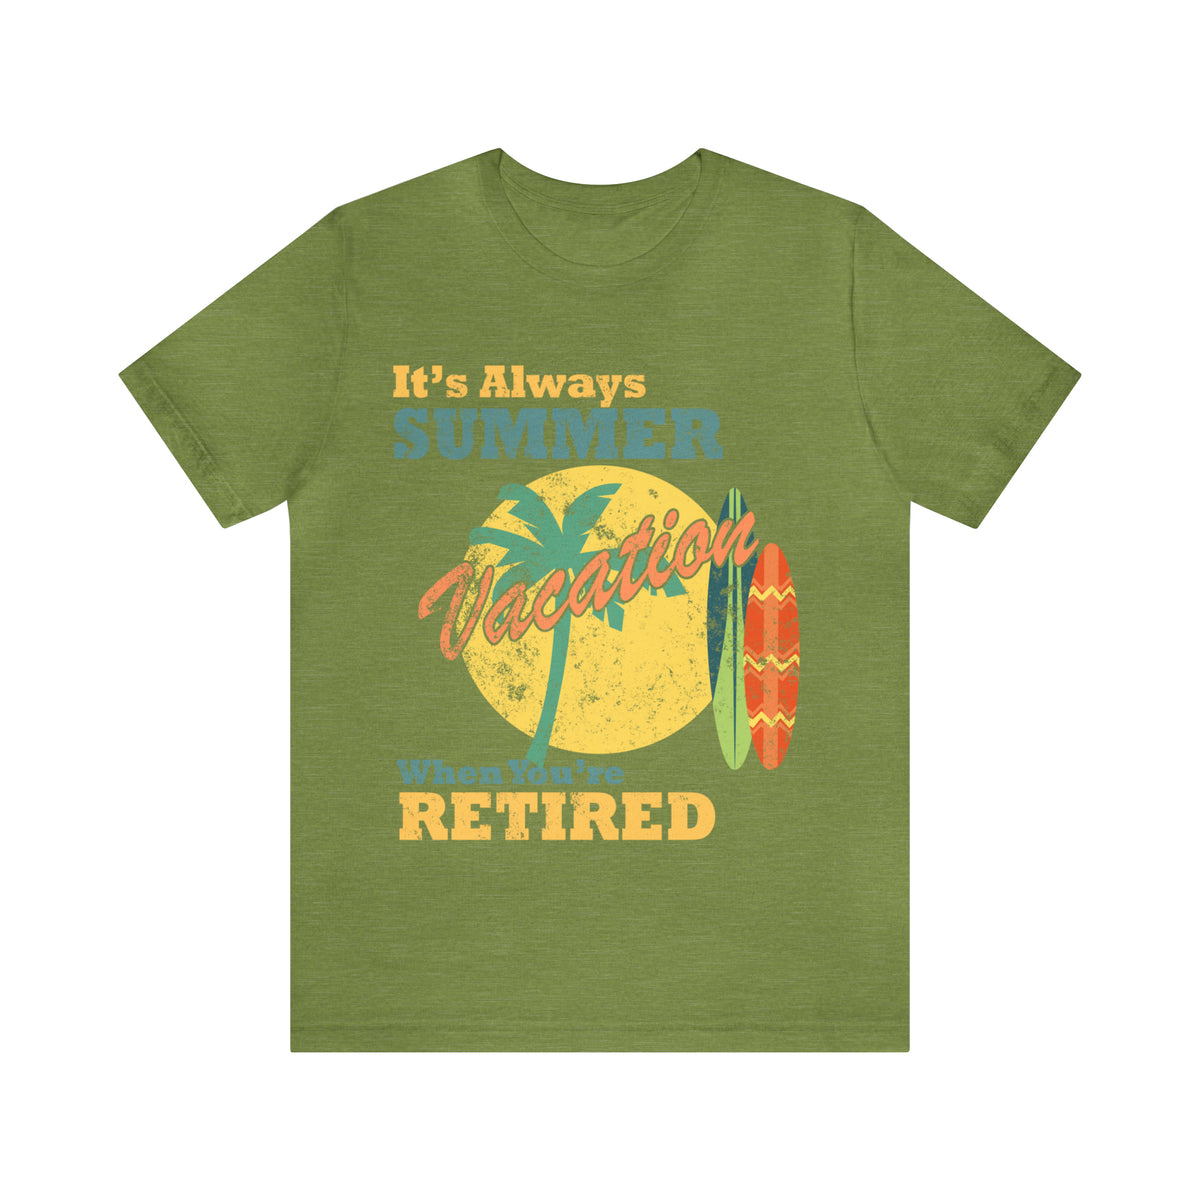 It's Always Summer Vacation When You're Retired"